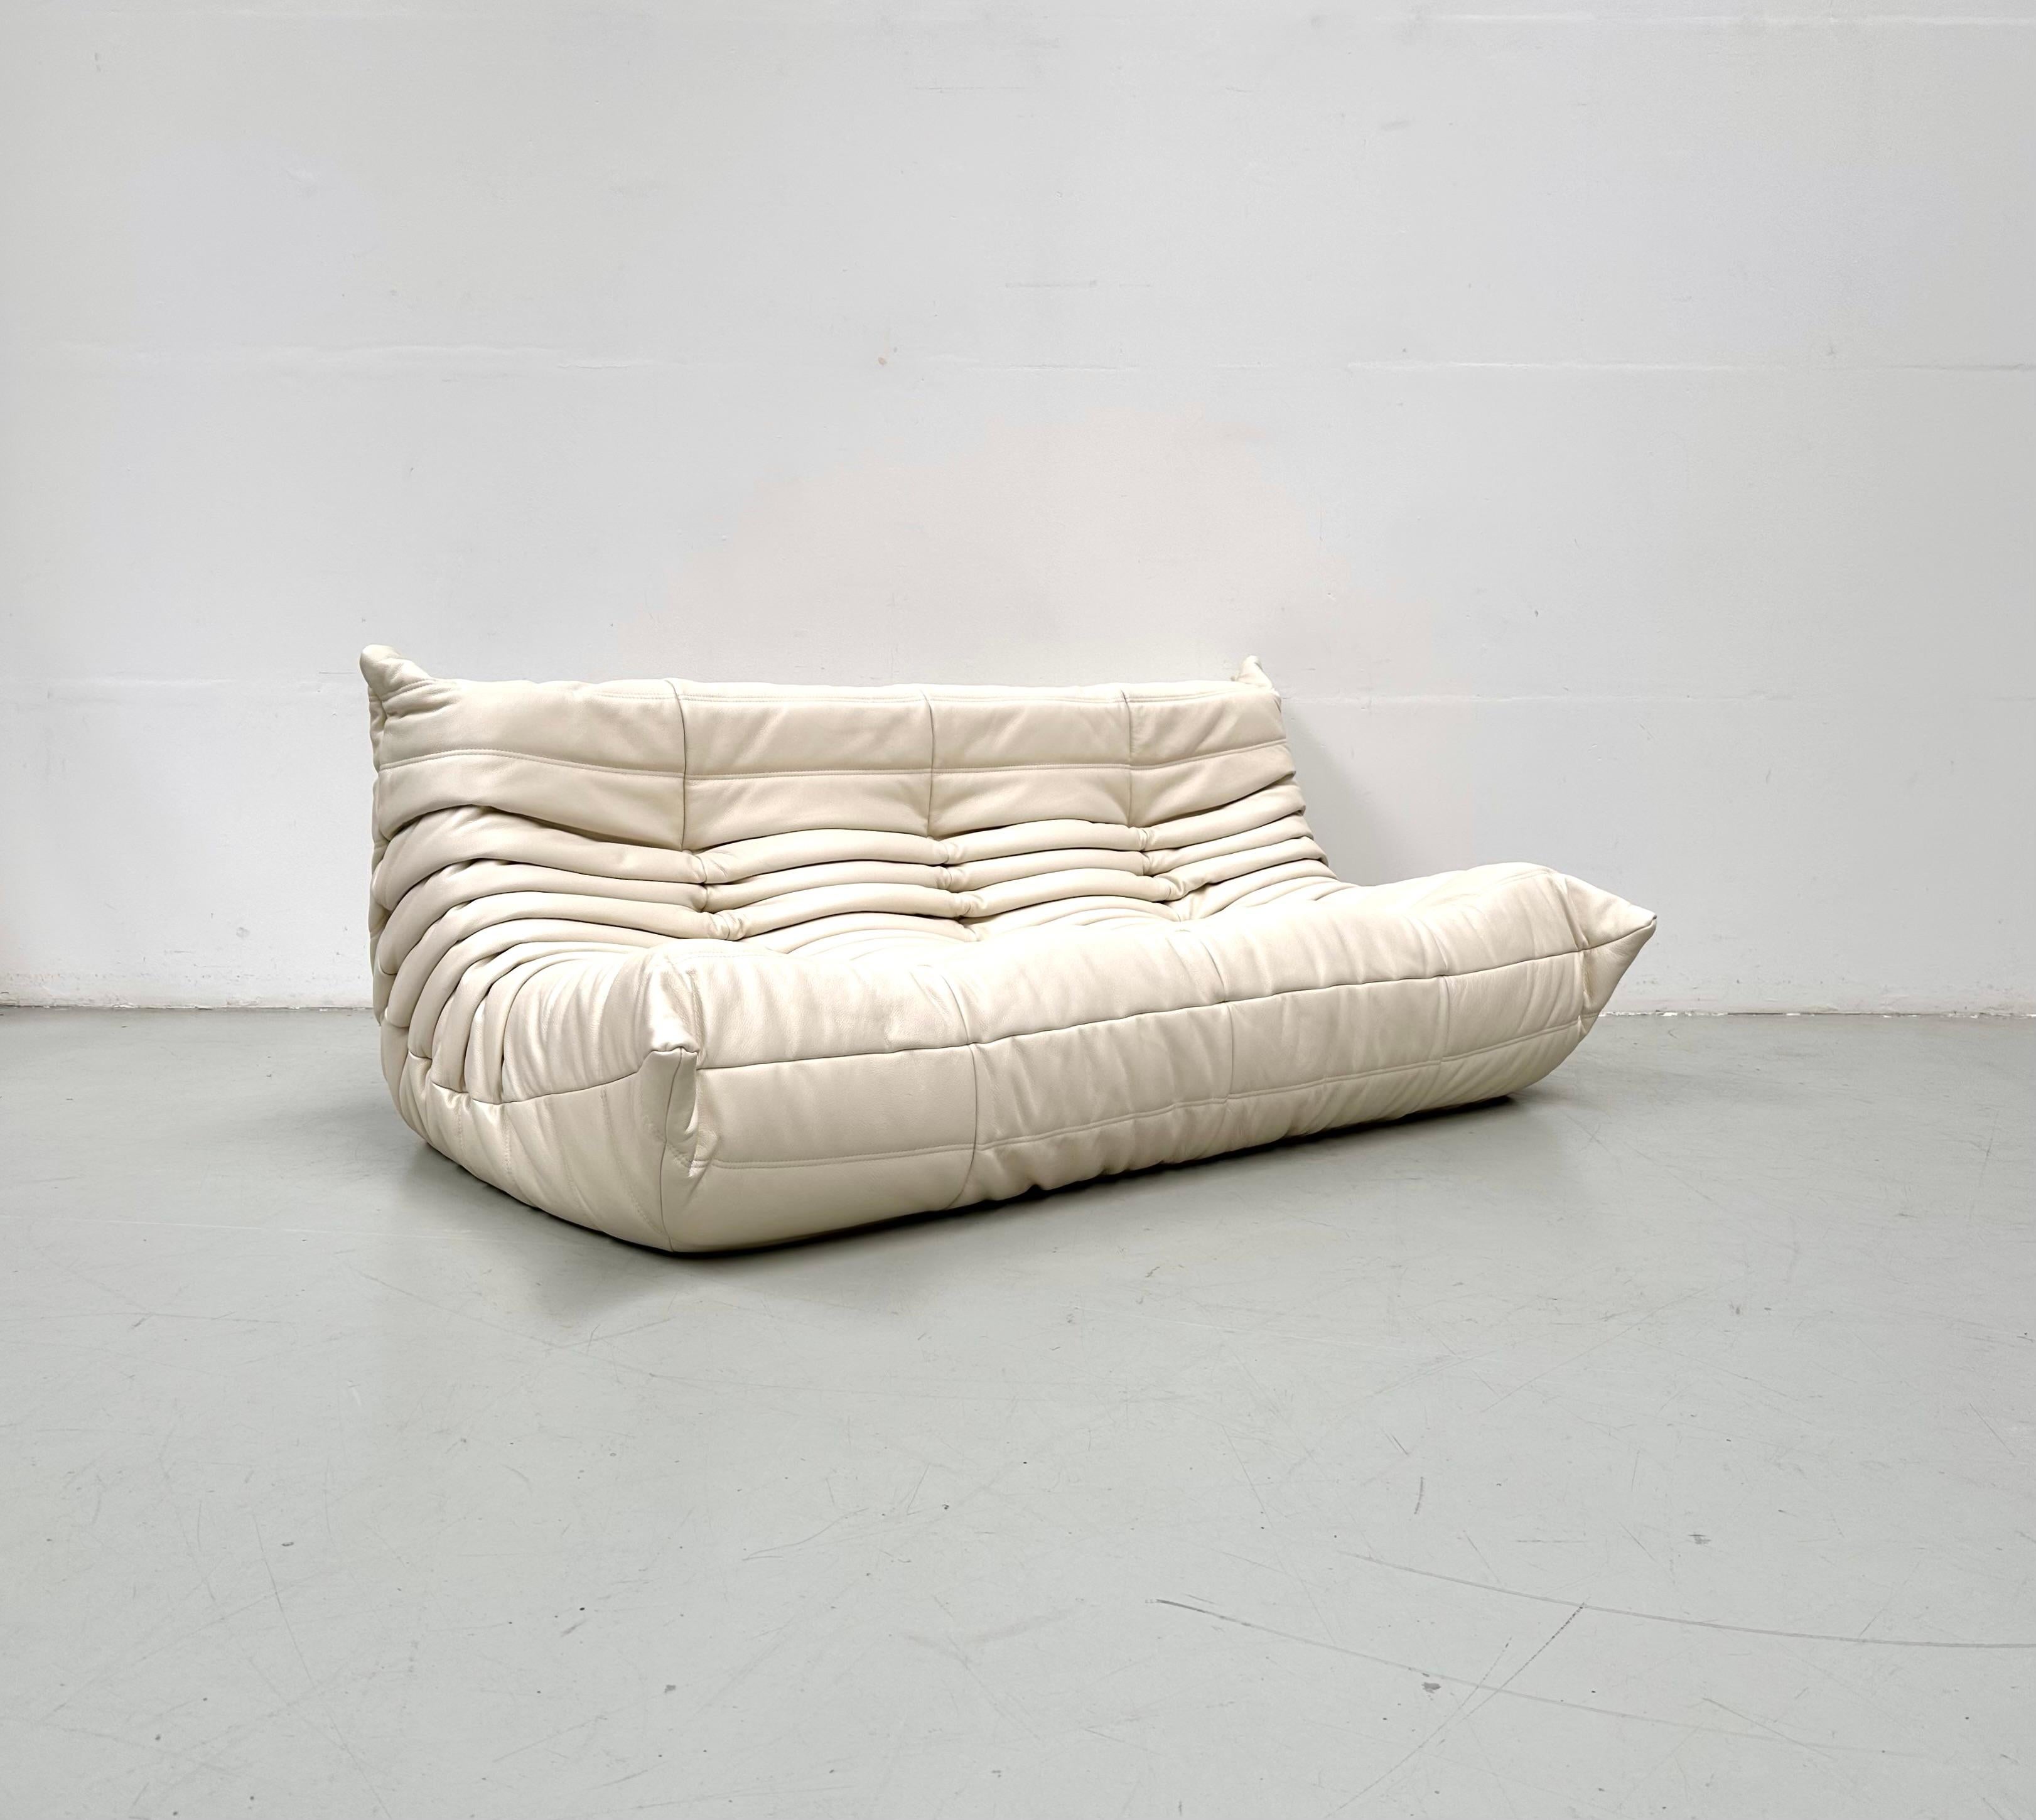 Mid-Century Modern French Vintage Togo Sofa in White Leather by Michel Ducaroy for Ligne Roset.